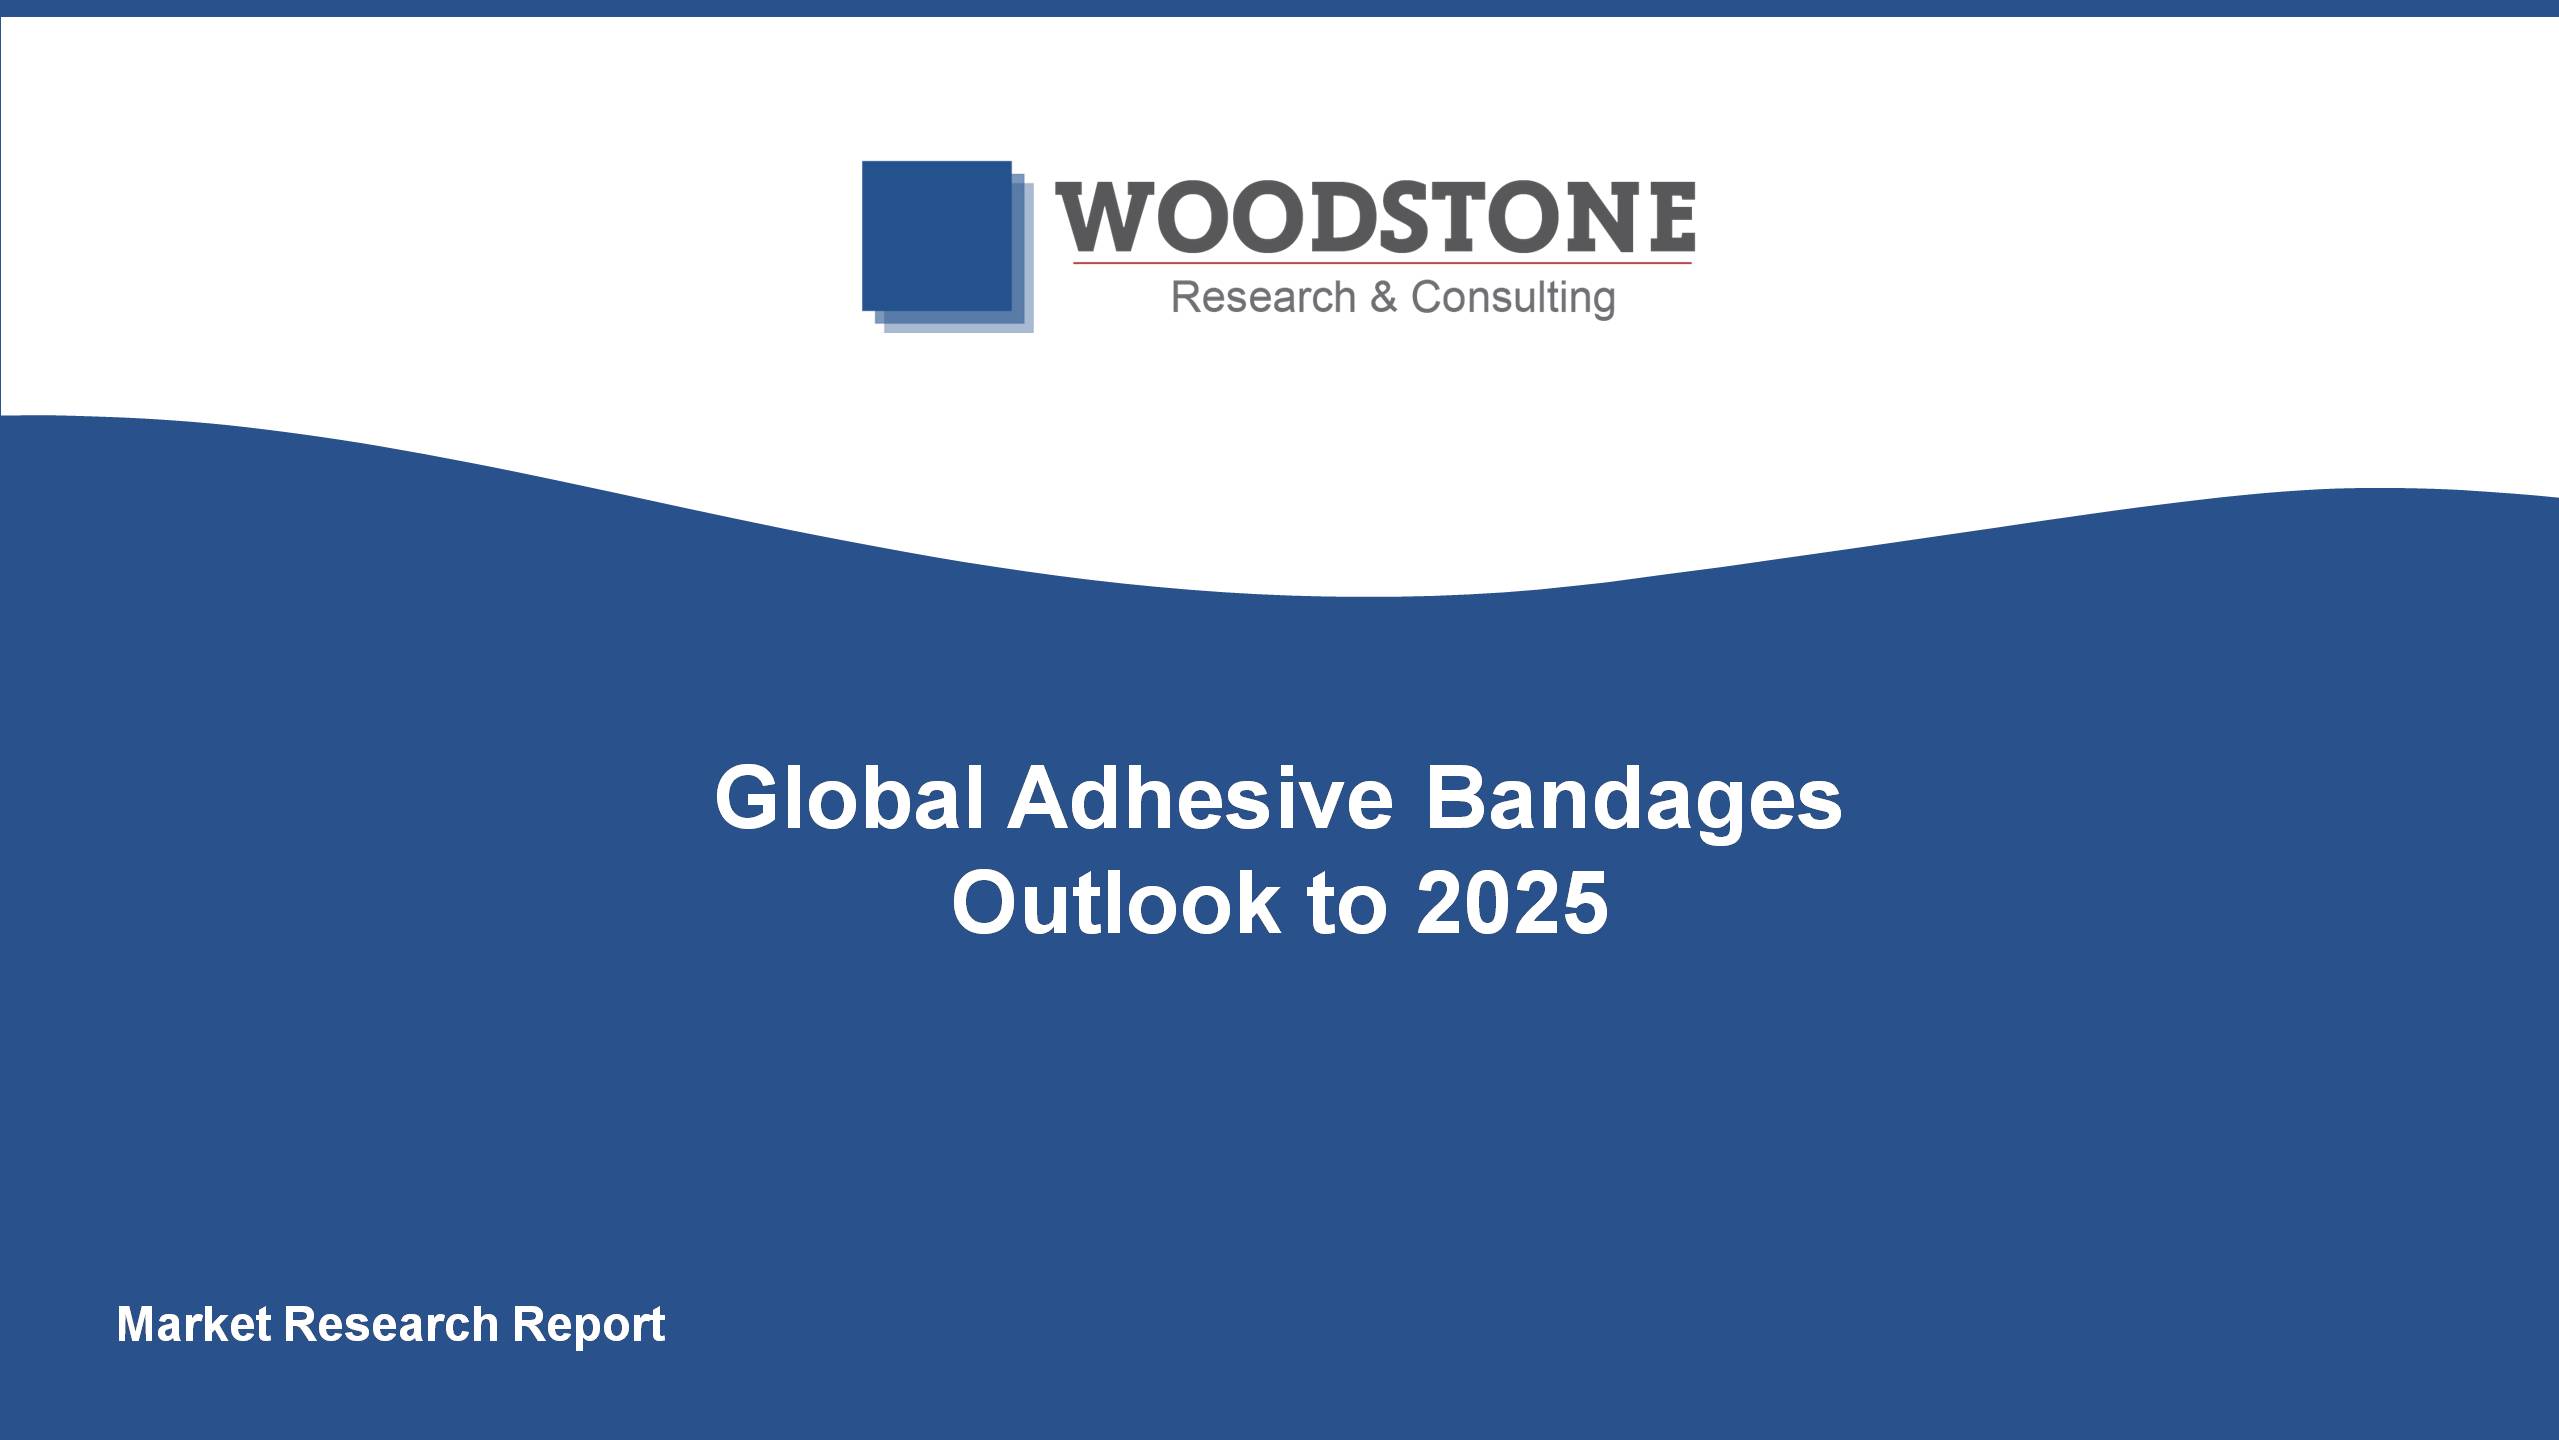 Global Adhesive Bandages Market Outlook to 2025